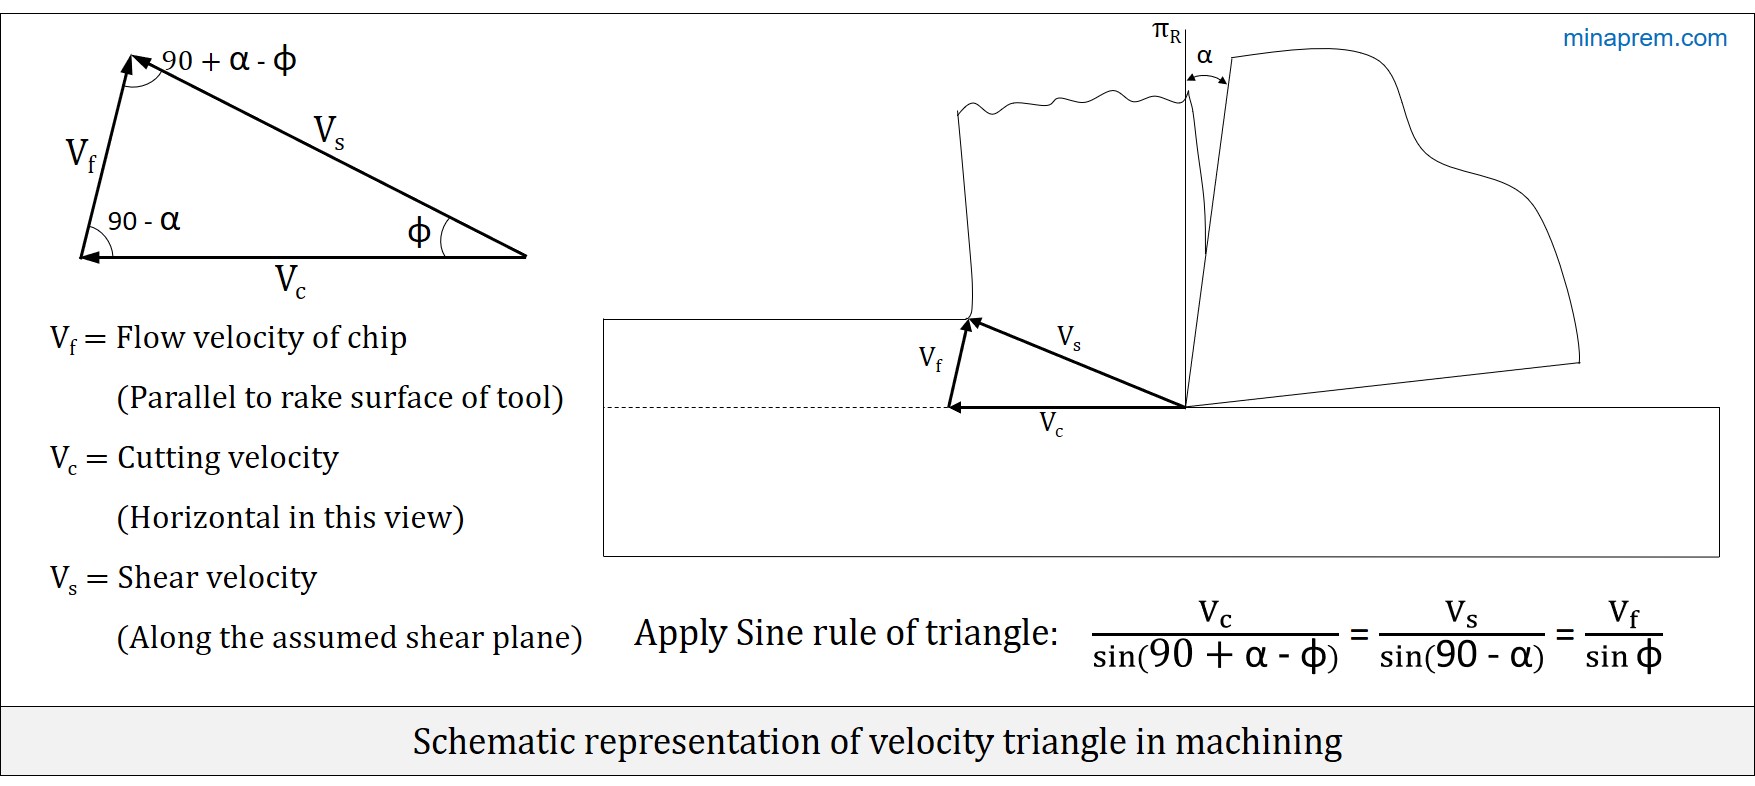 Velocity triangle - expressing shear velocity in terms of cutting velocity, orthogonal rake angle and shear angle